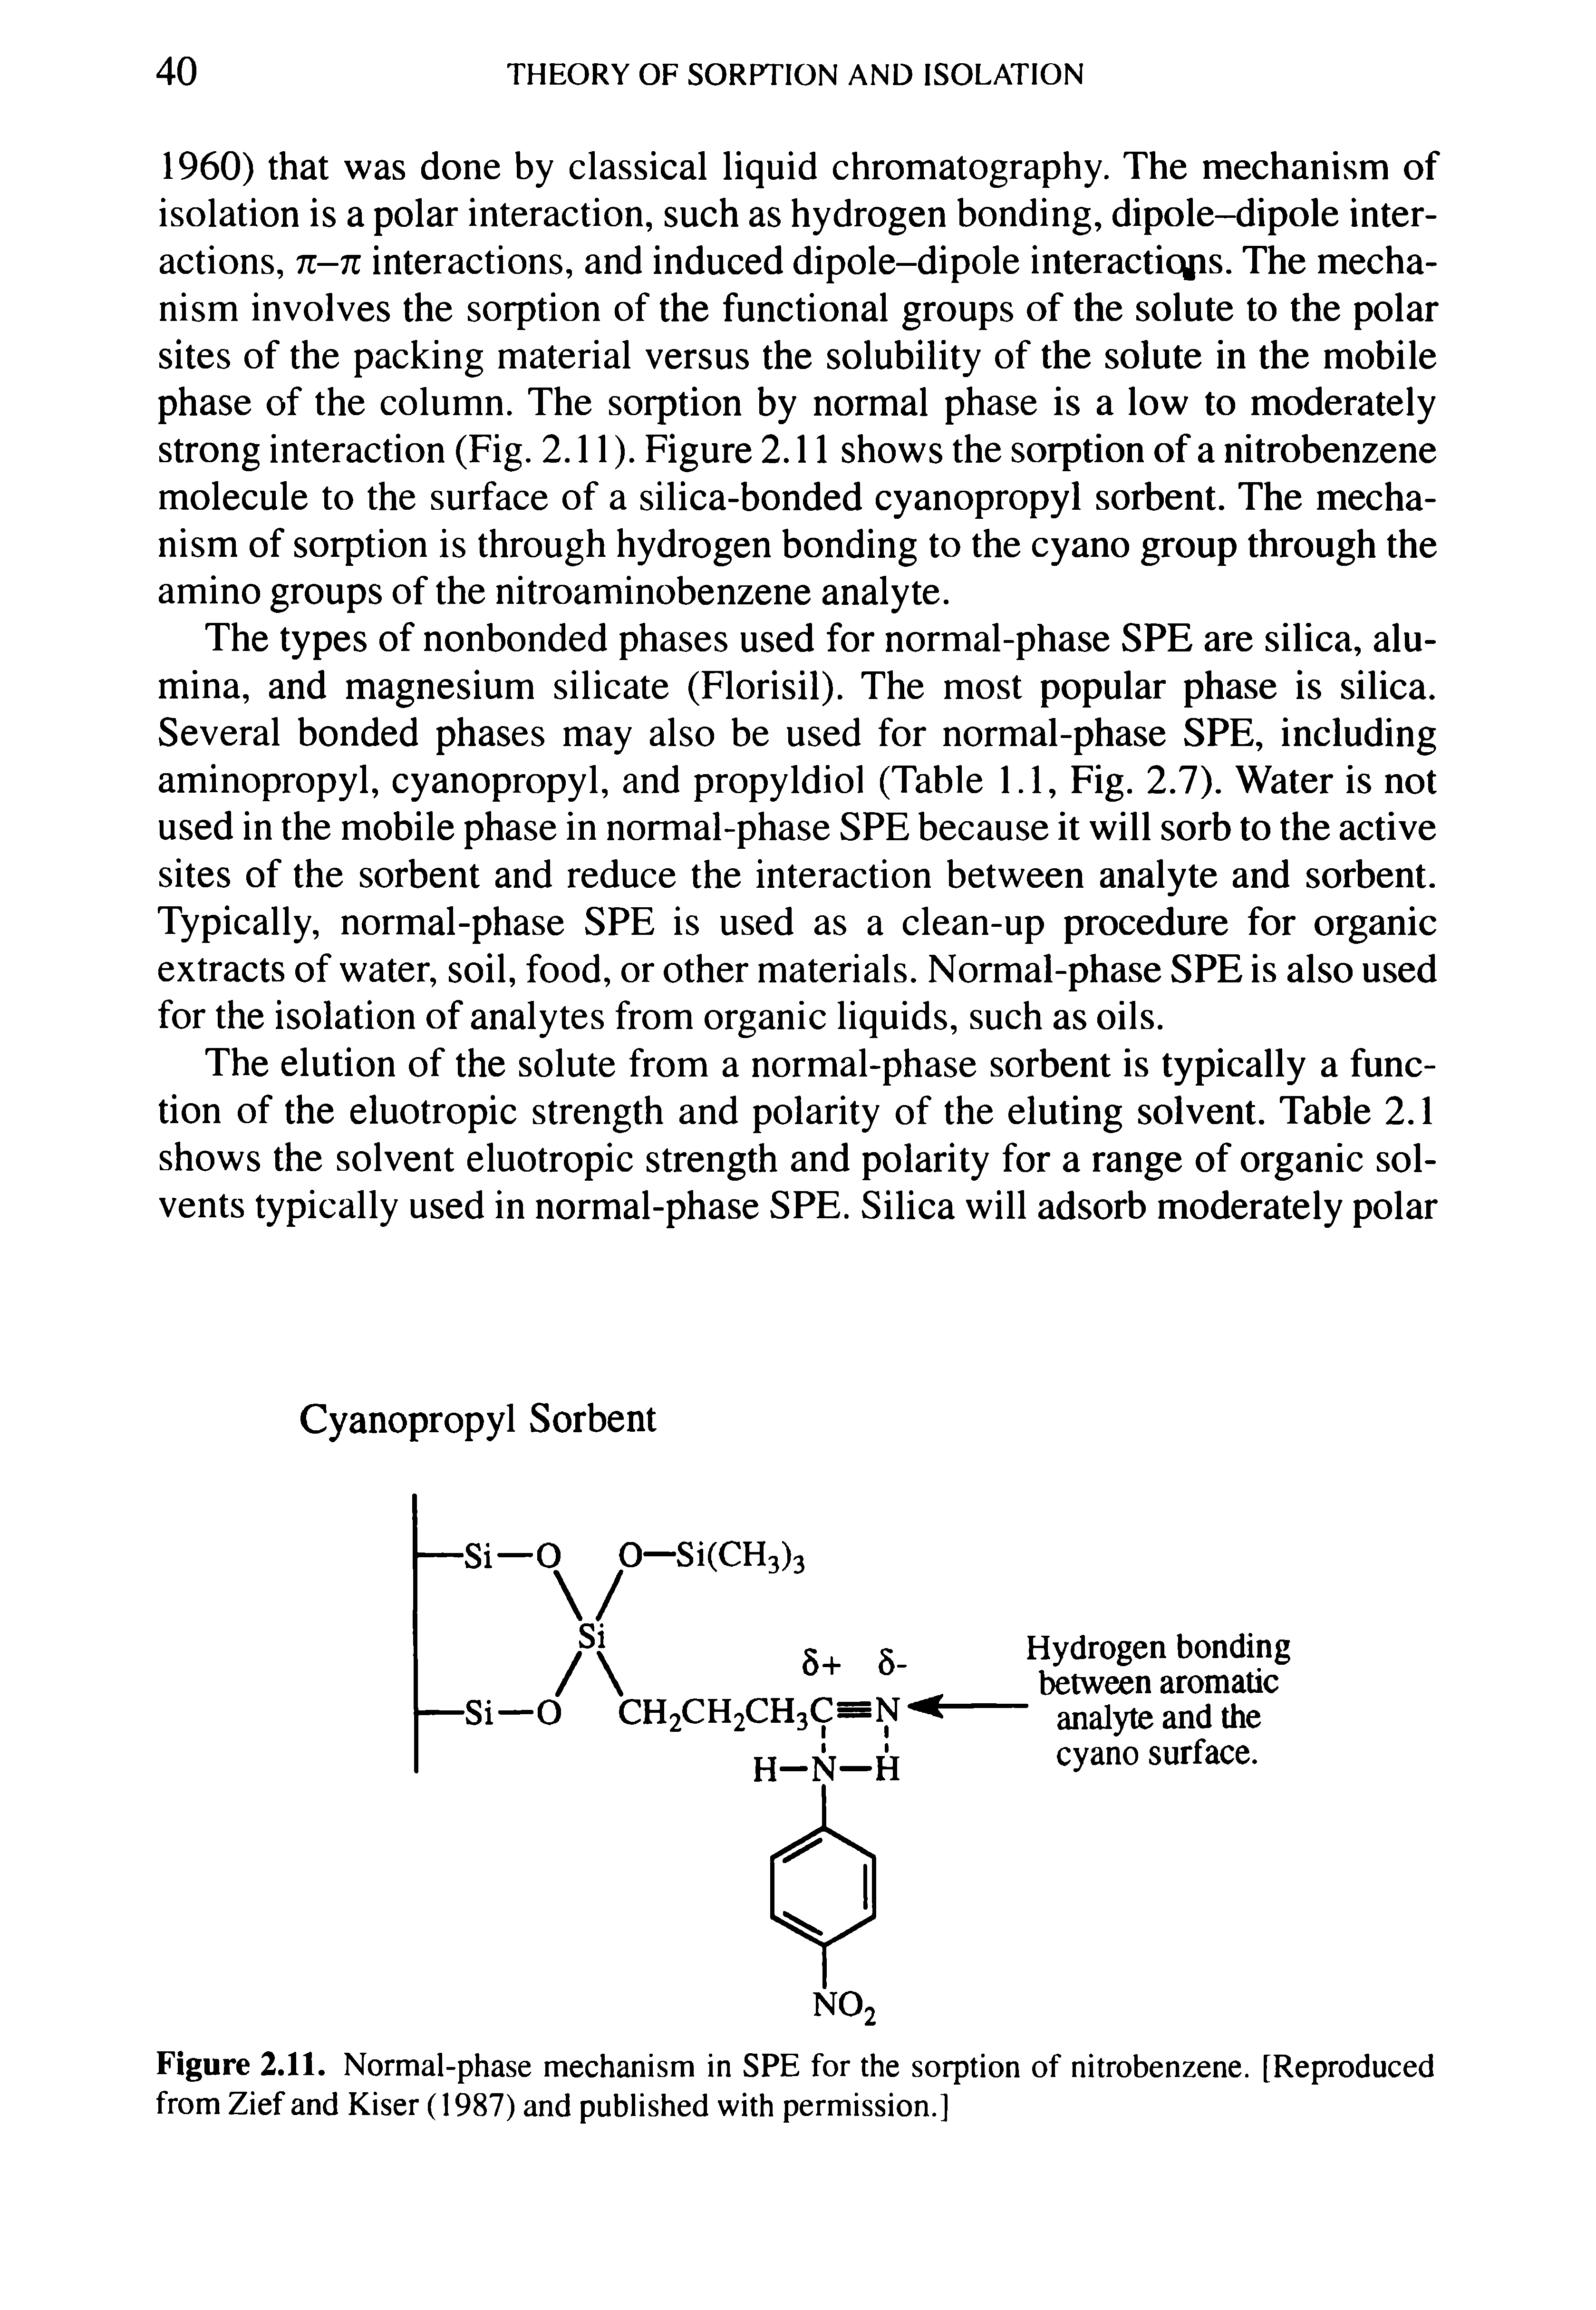 Figure 2.11. Normal-phase mechanism in SPE for the sorption of nitrobenzene. [Reproduced from Zief and Kiser (1987) and published with permission.]...